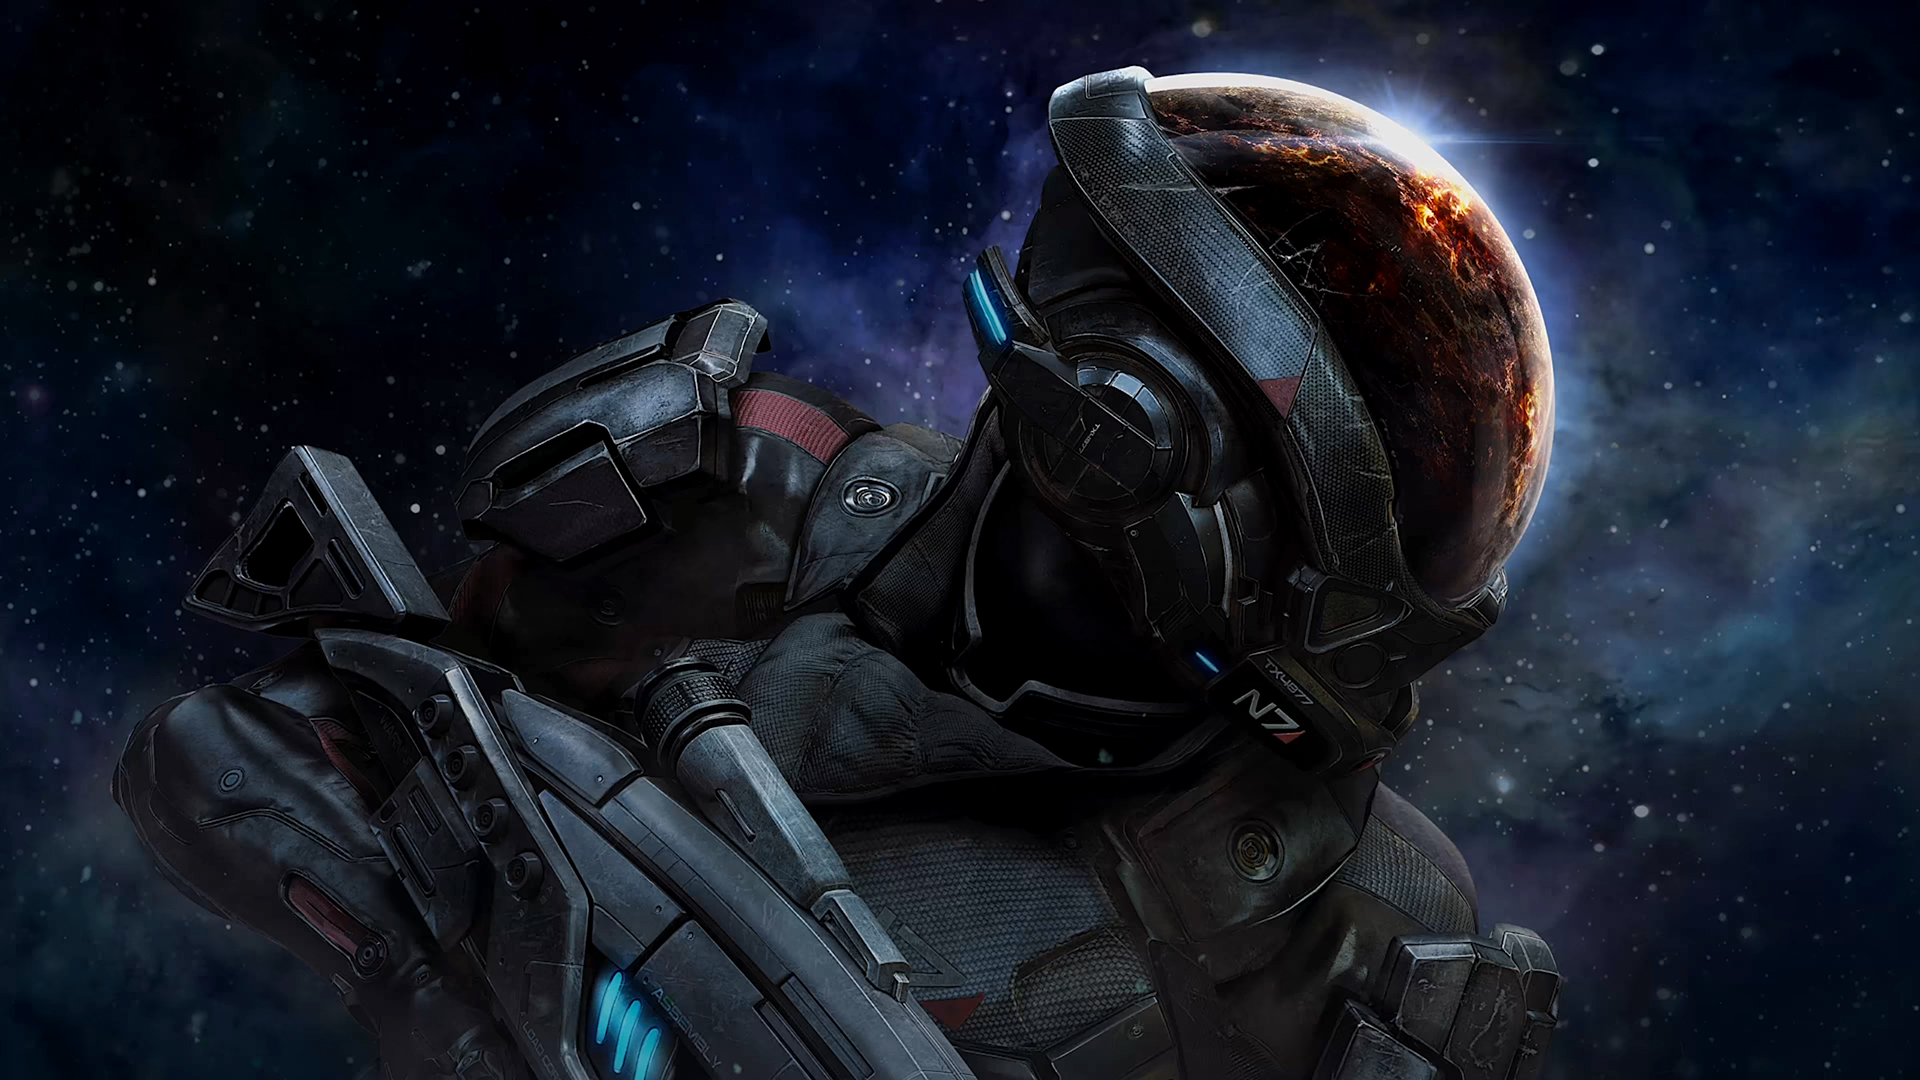 mass effect live wallpaper,action adventure game,pc game,shooter game,space,cg artwork